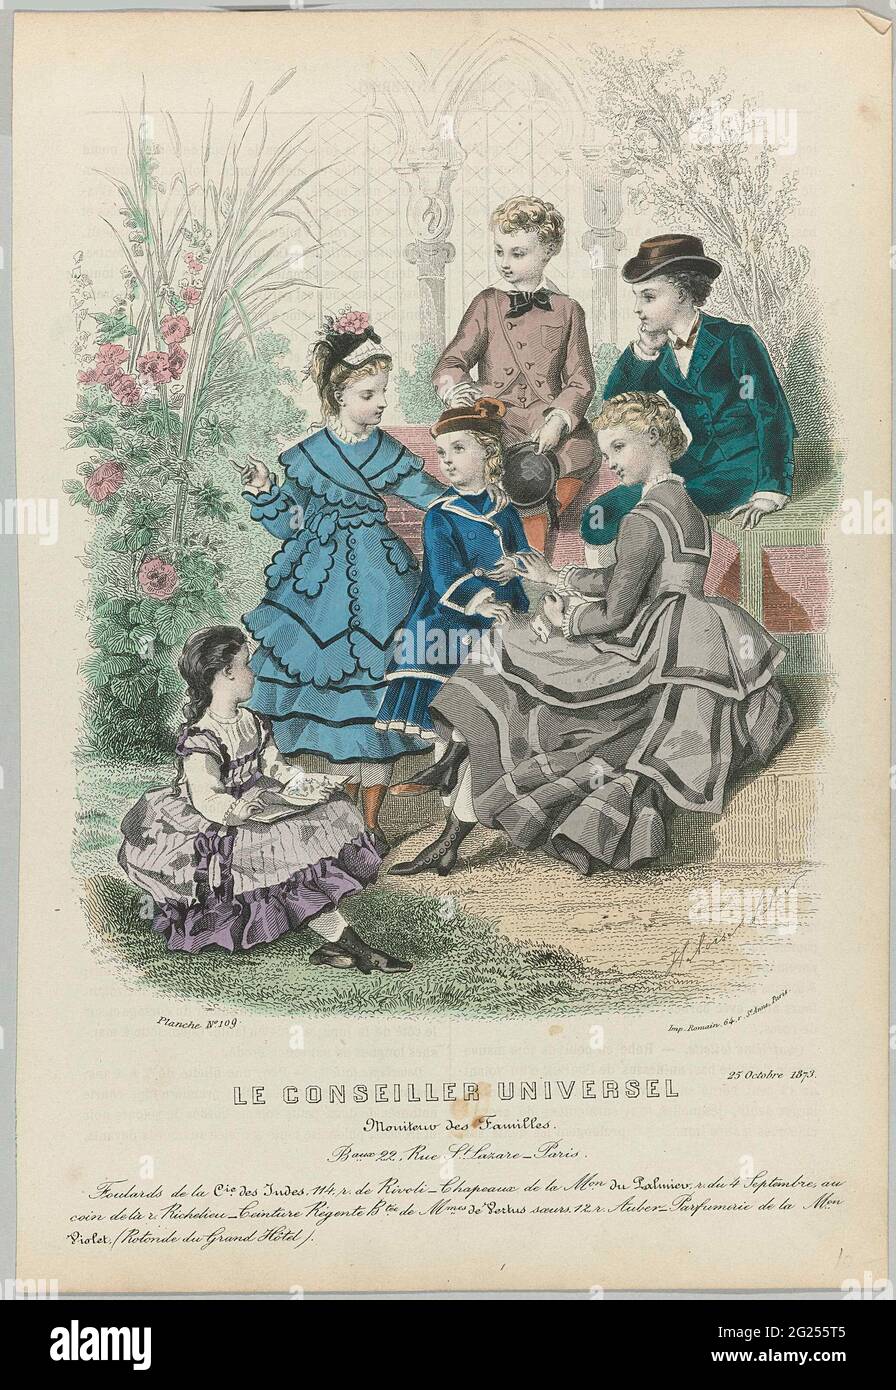 Le Conseiller Universel, 25 Octobre 1873, no. 109: Foulards de la Cie.des  Indes (...). A young lady and six children outside, dressed in clothing  made in fabrics from Compagnie des Indes with